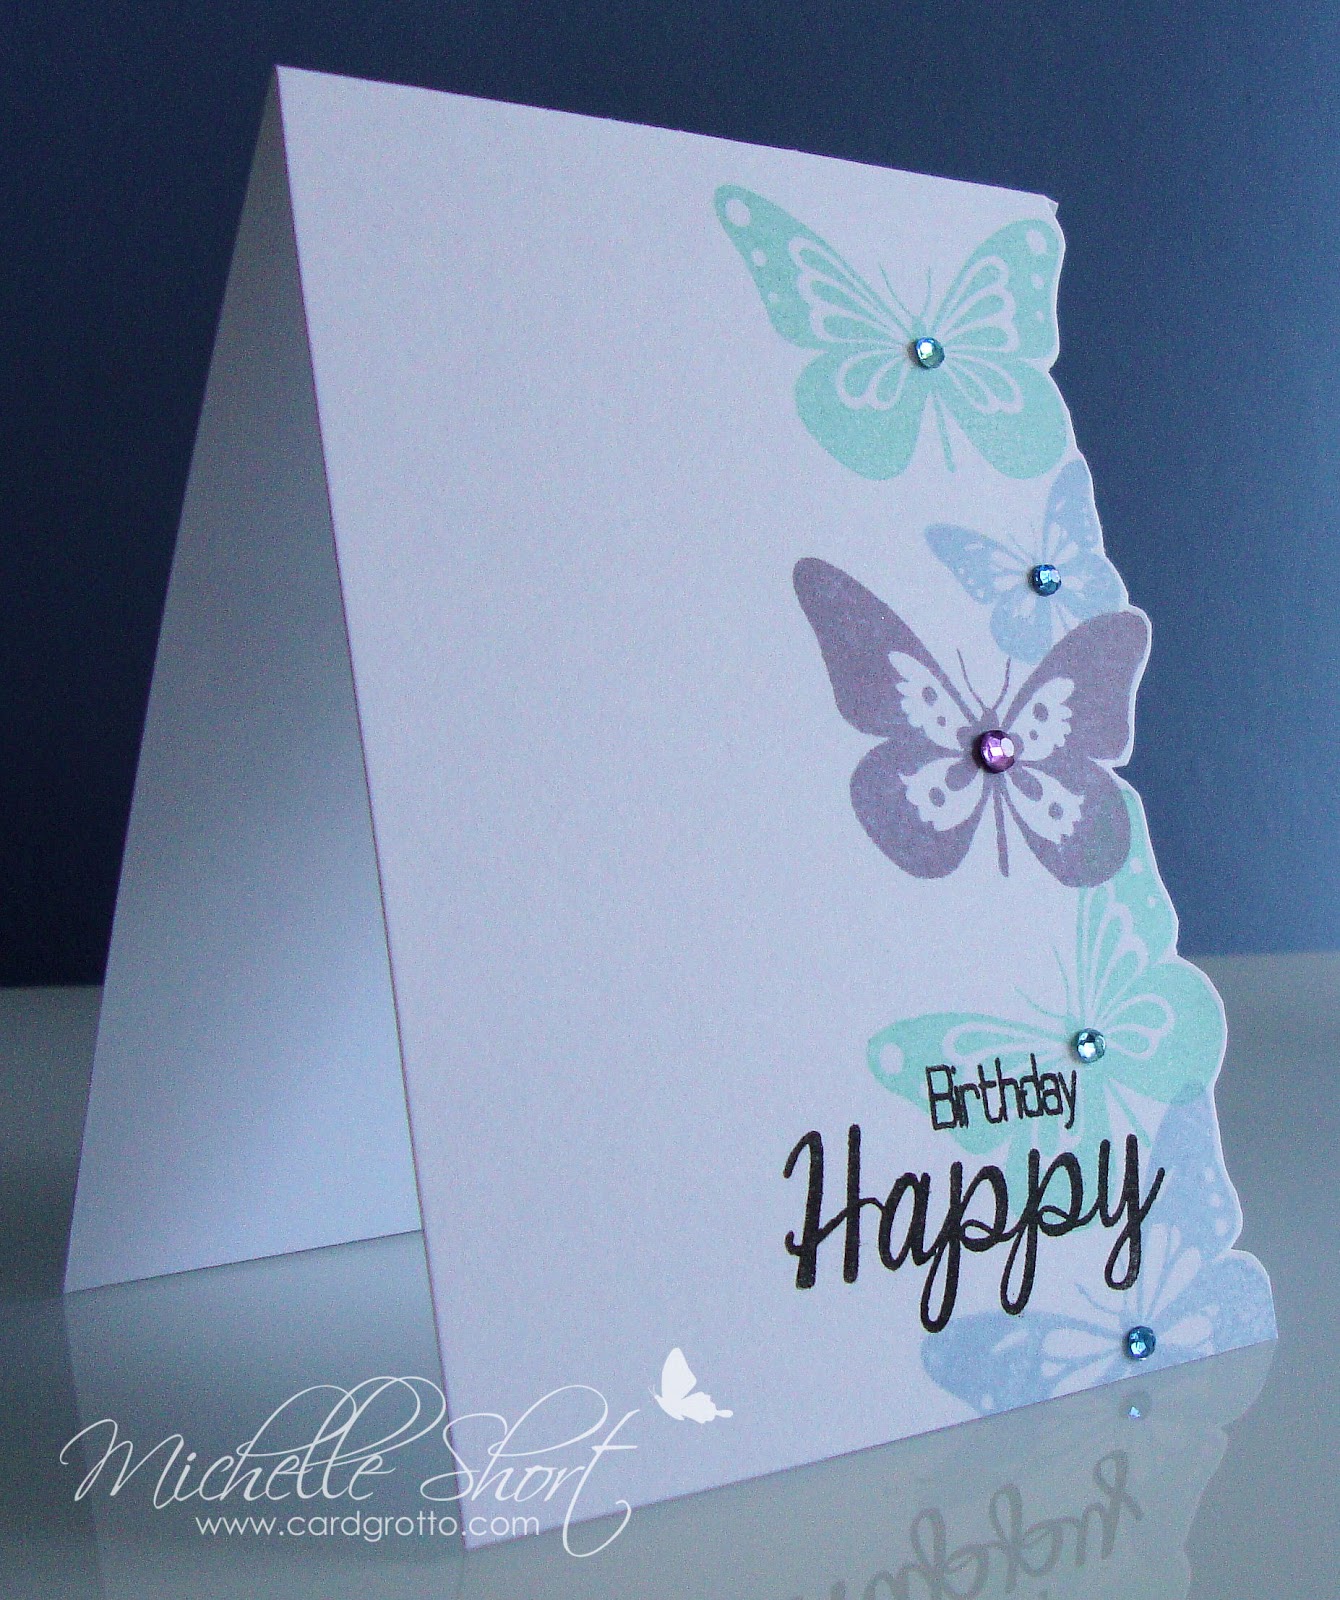 The Card Grotto: One Layer Butterflies